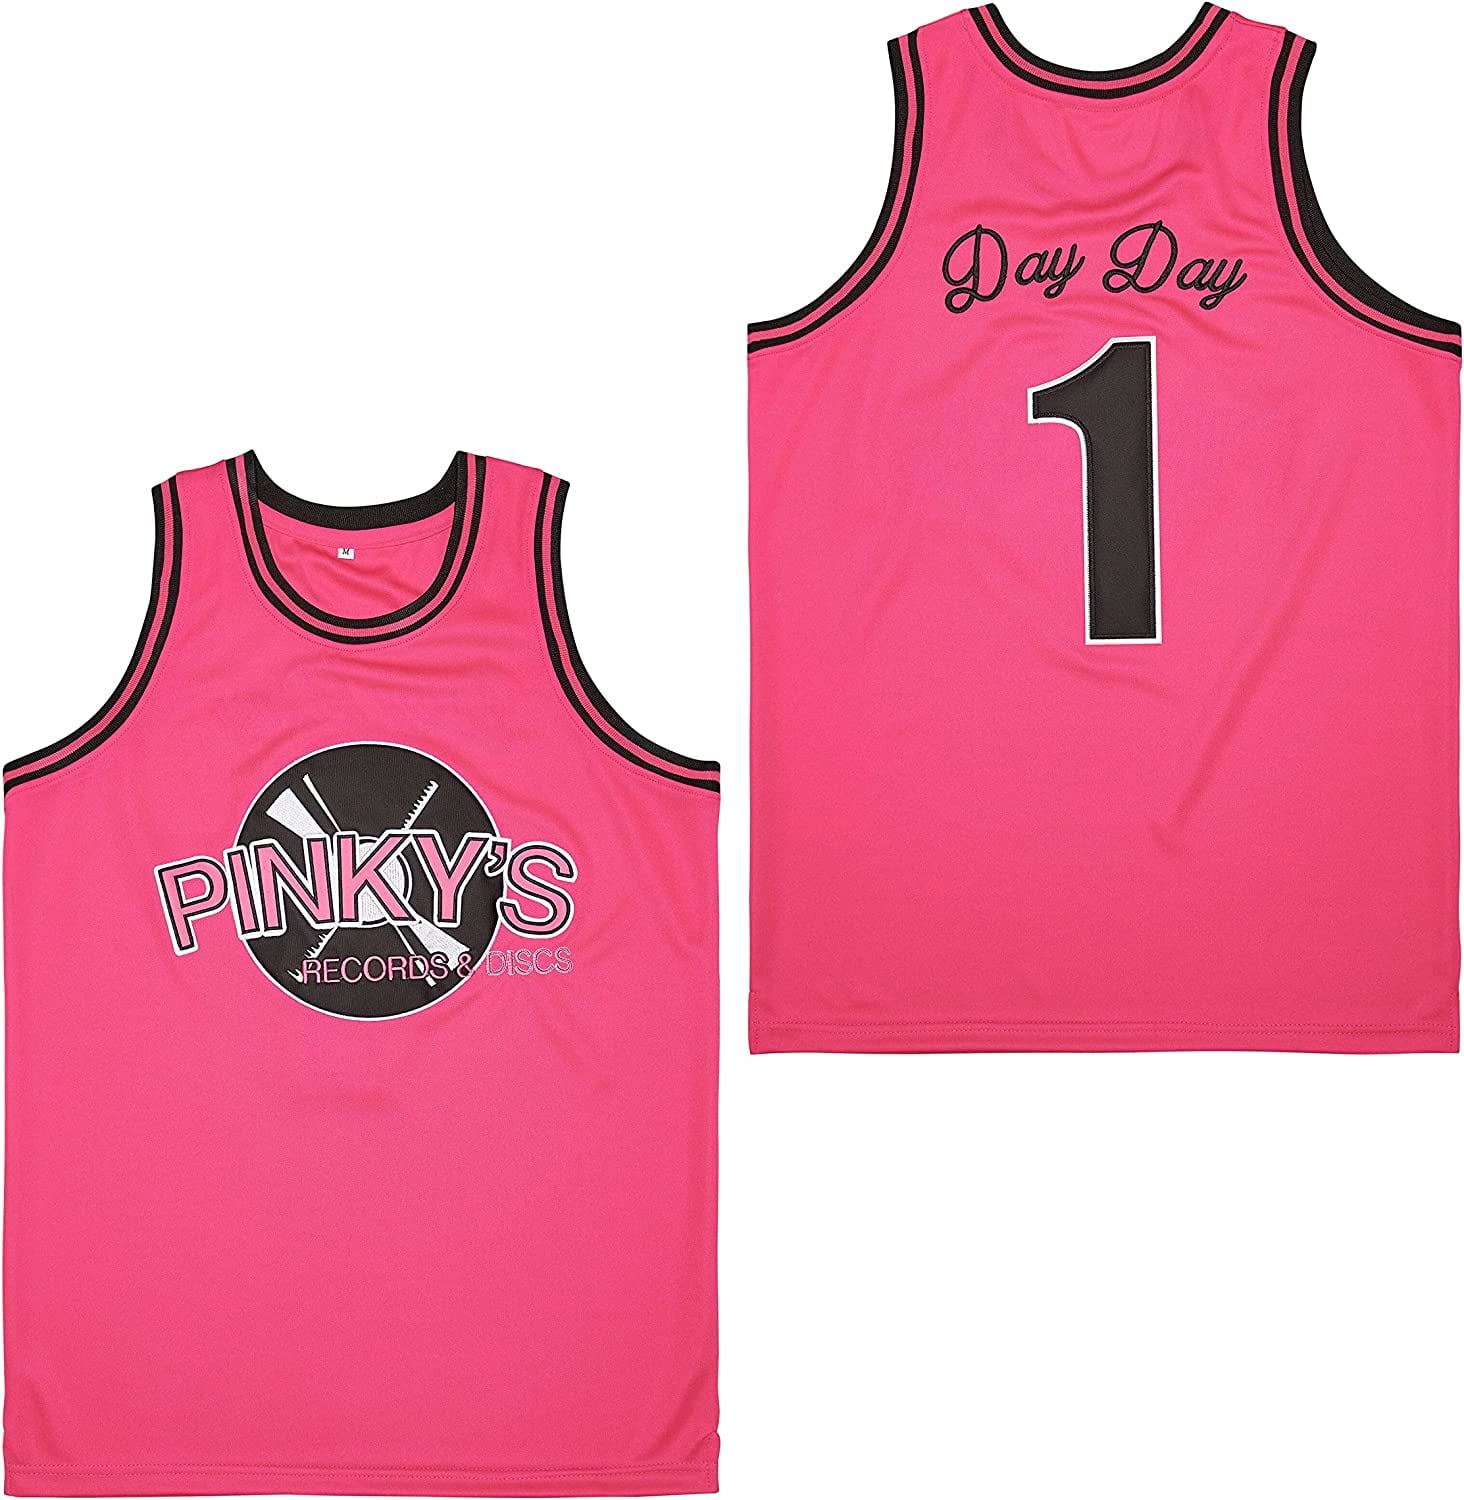 Men's Next Friday Pinky's Record Movie 90s Hip Hop Stitched Sports Fan Basketball  Jersey Clothing for Party Pink 